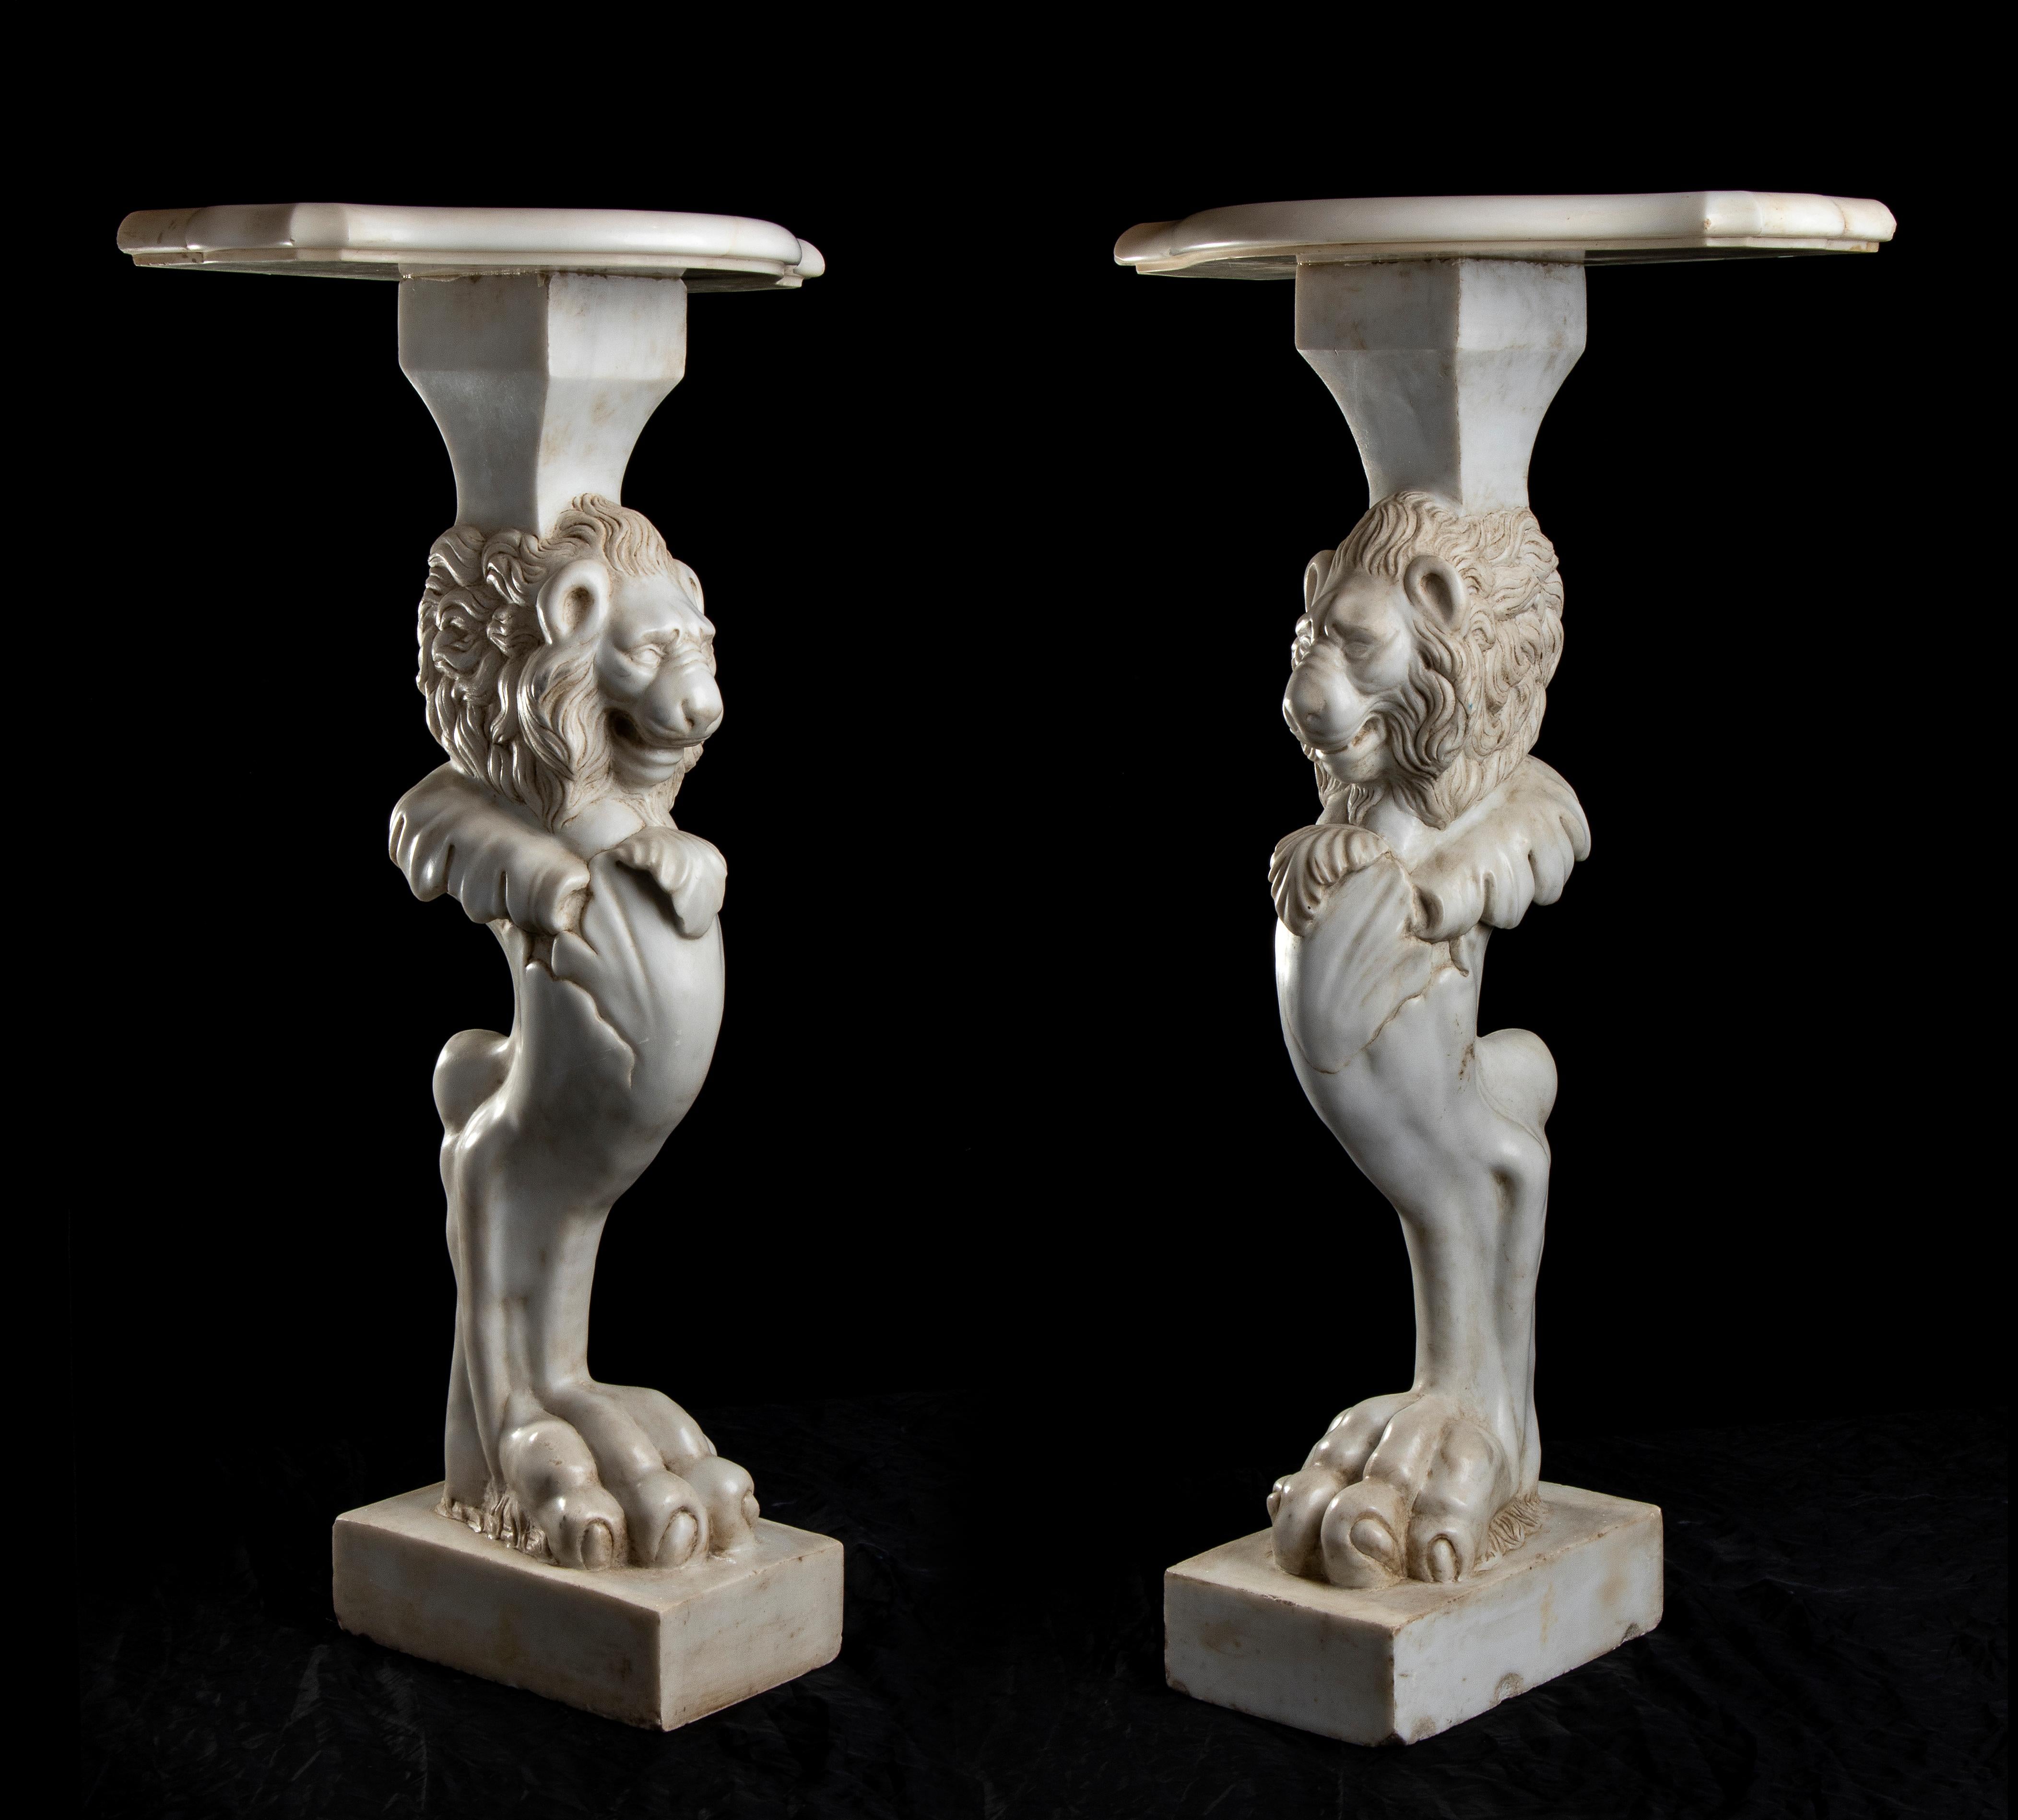 Unknown Figurative Sculpture - White Marble Pair of Sculptures With Heads of Lions and Ferals Feet Roman Style